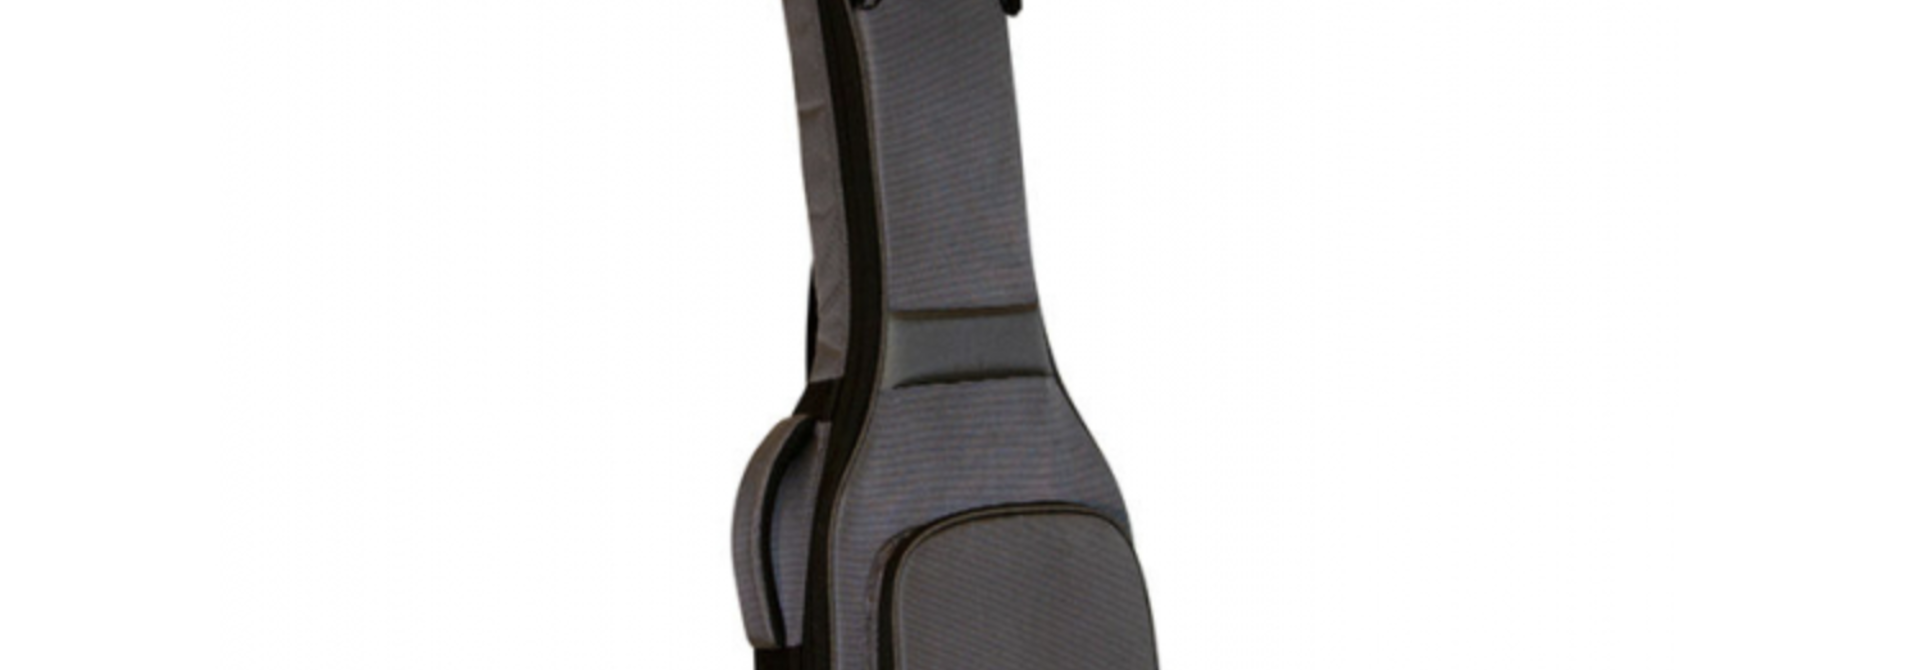 On-Stage Deluxe Bass Guitar Gig Bag GBB4990CG